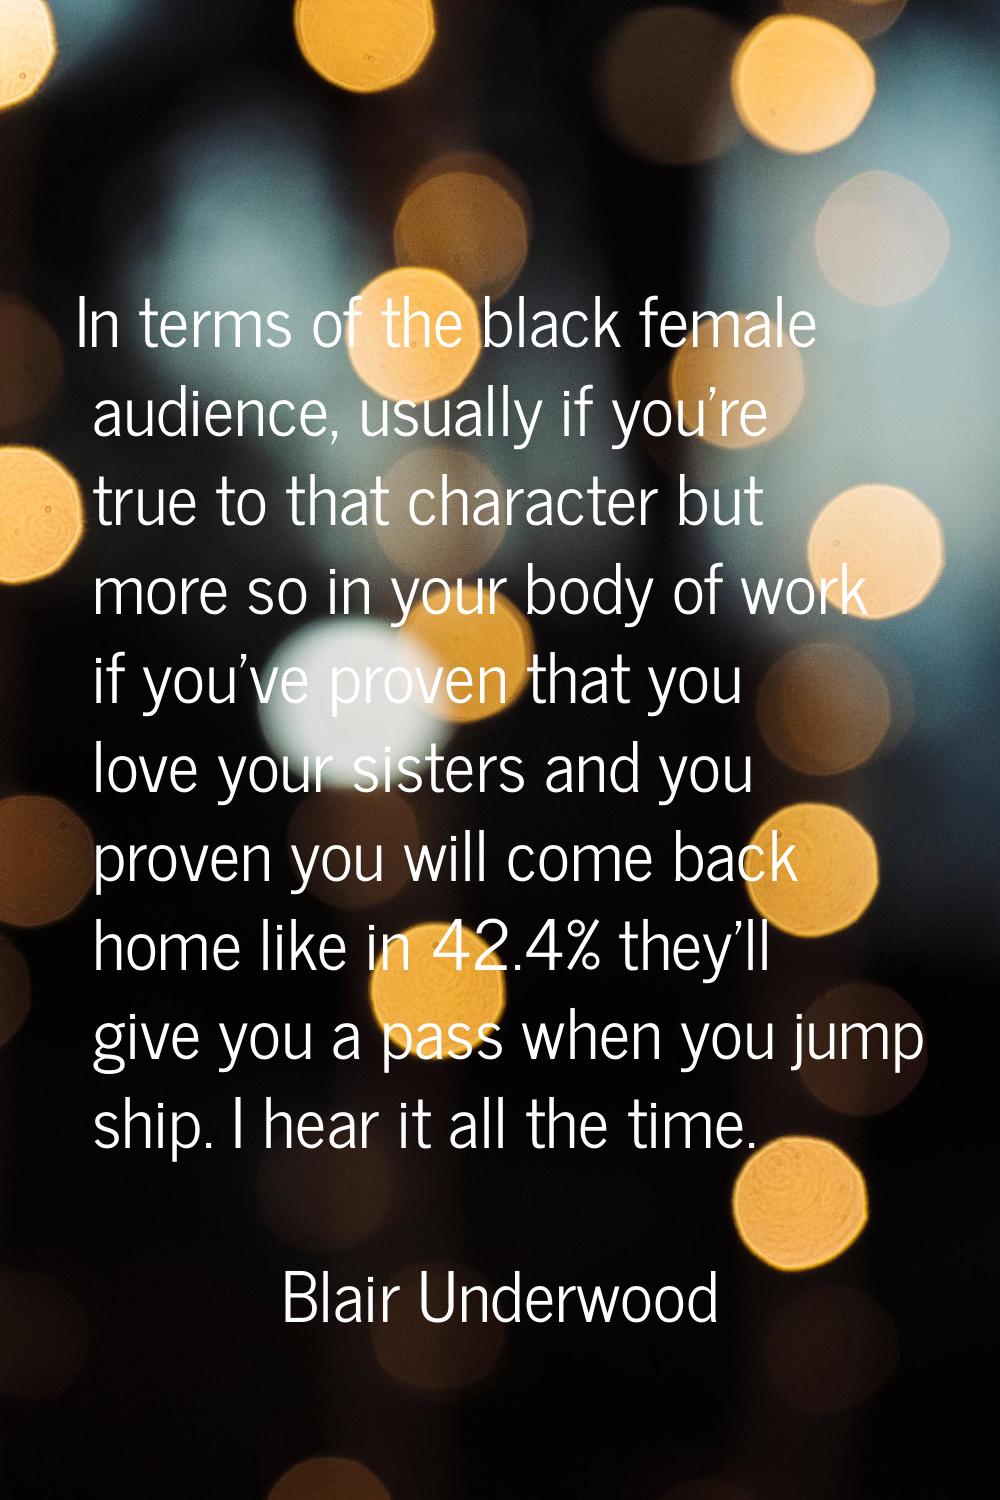 In terms of the black female audience, usually if you're true to that character but more so in your